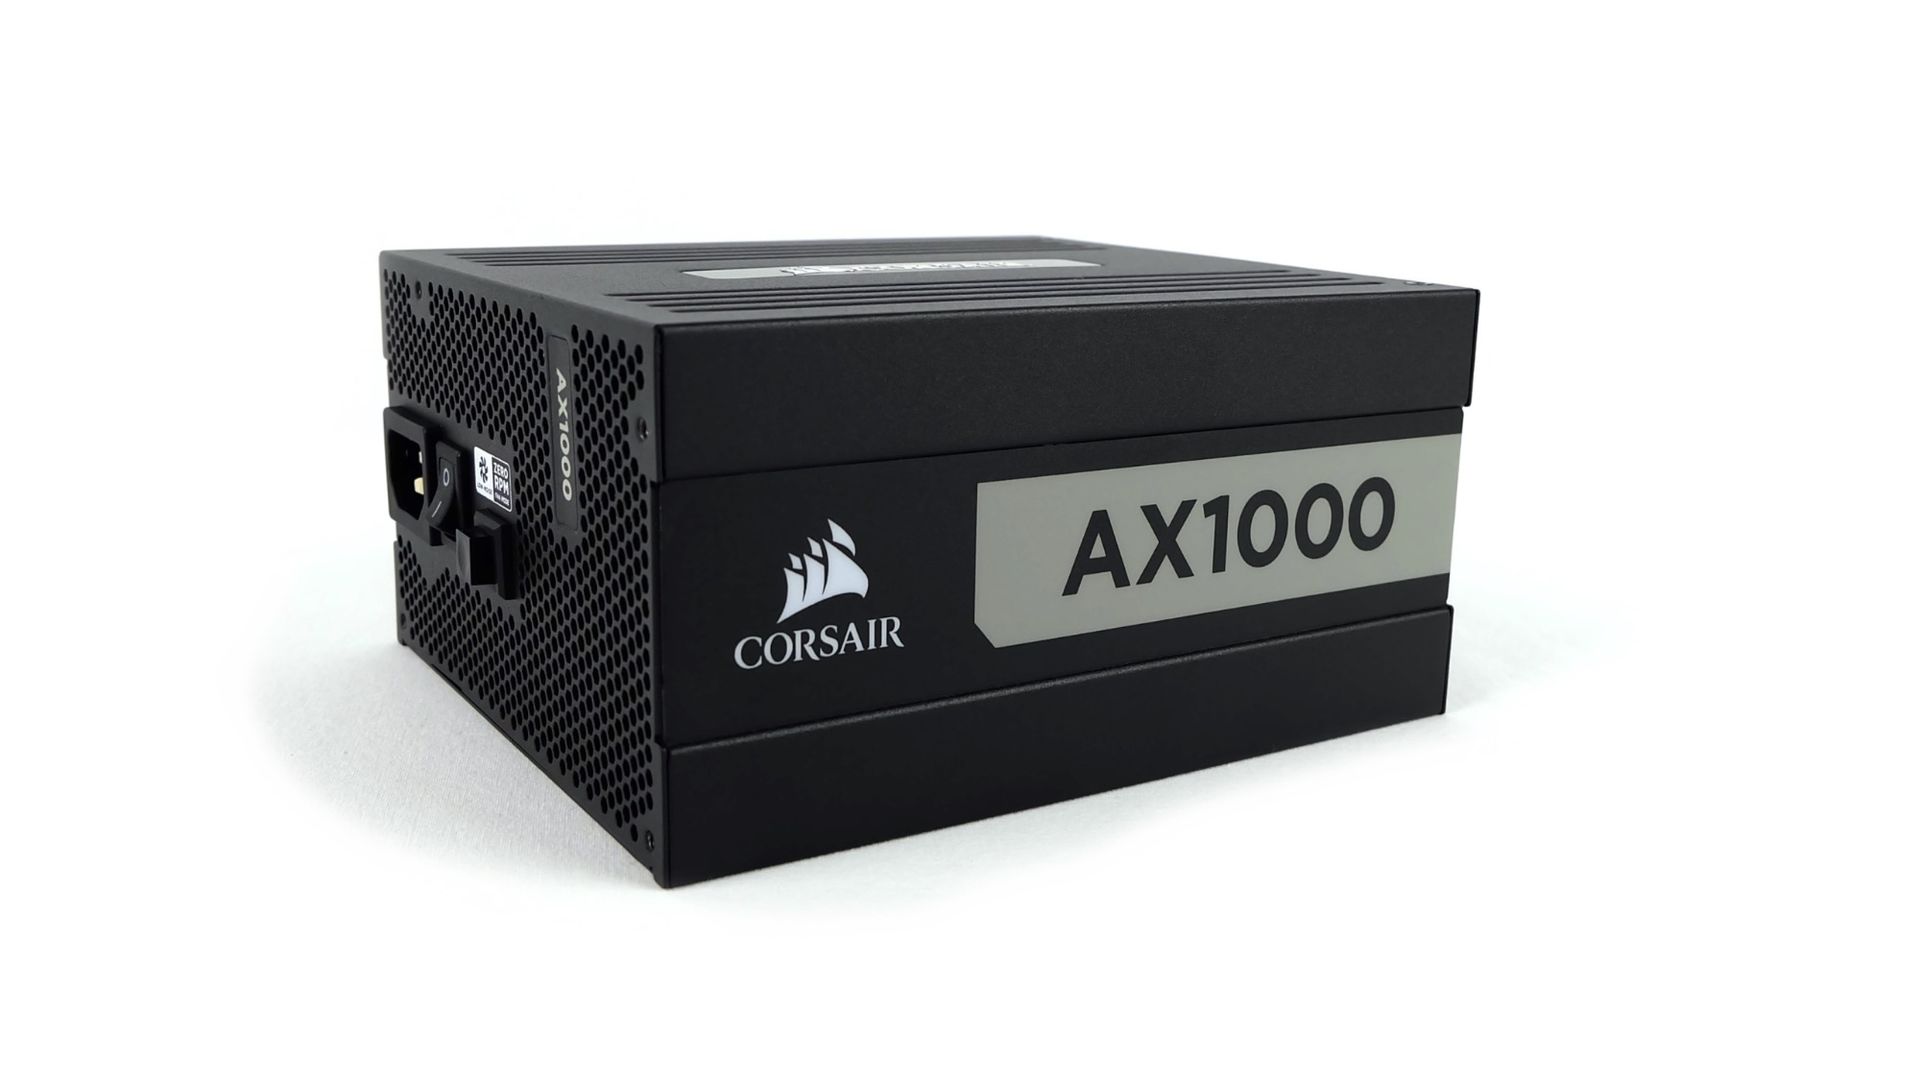 Corsair AX1000 PSU & Kit Type 4 Gen 4 - Neoseeker Holiday 2020 Gaming System Build - Page 4